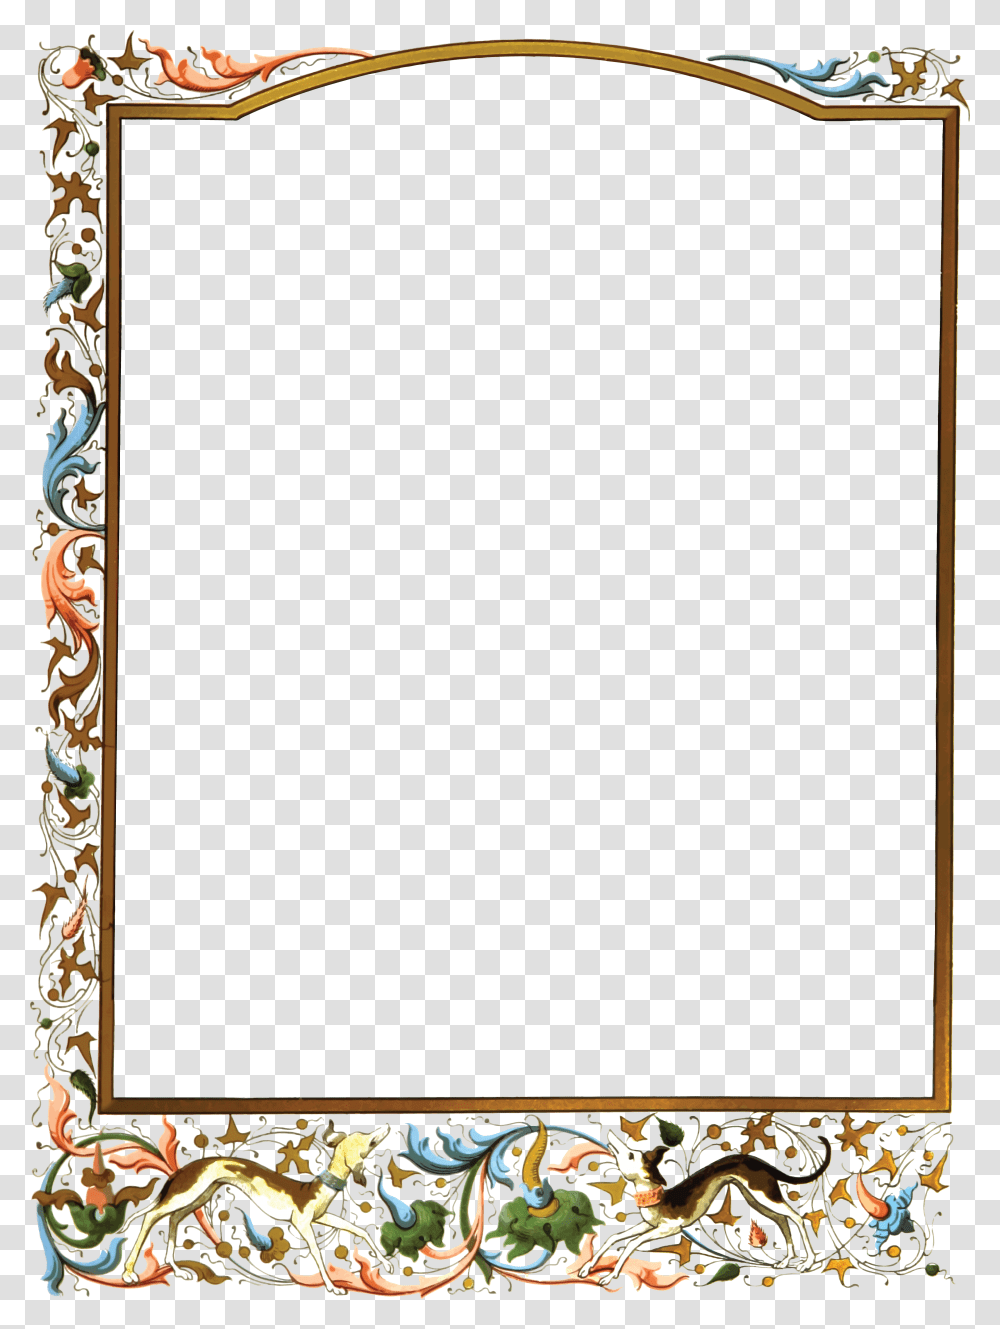 This Free Icons Design Of Ornate Frame Clip Art Library Flower Film Frame, Rug, Text Transparent Png